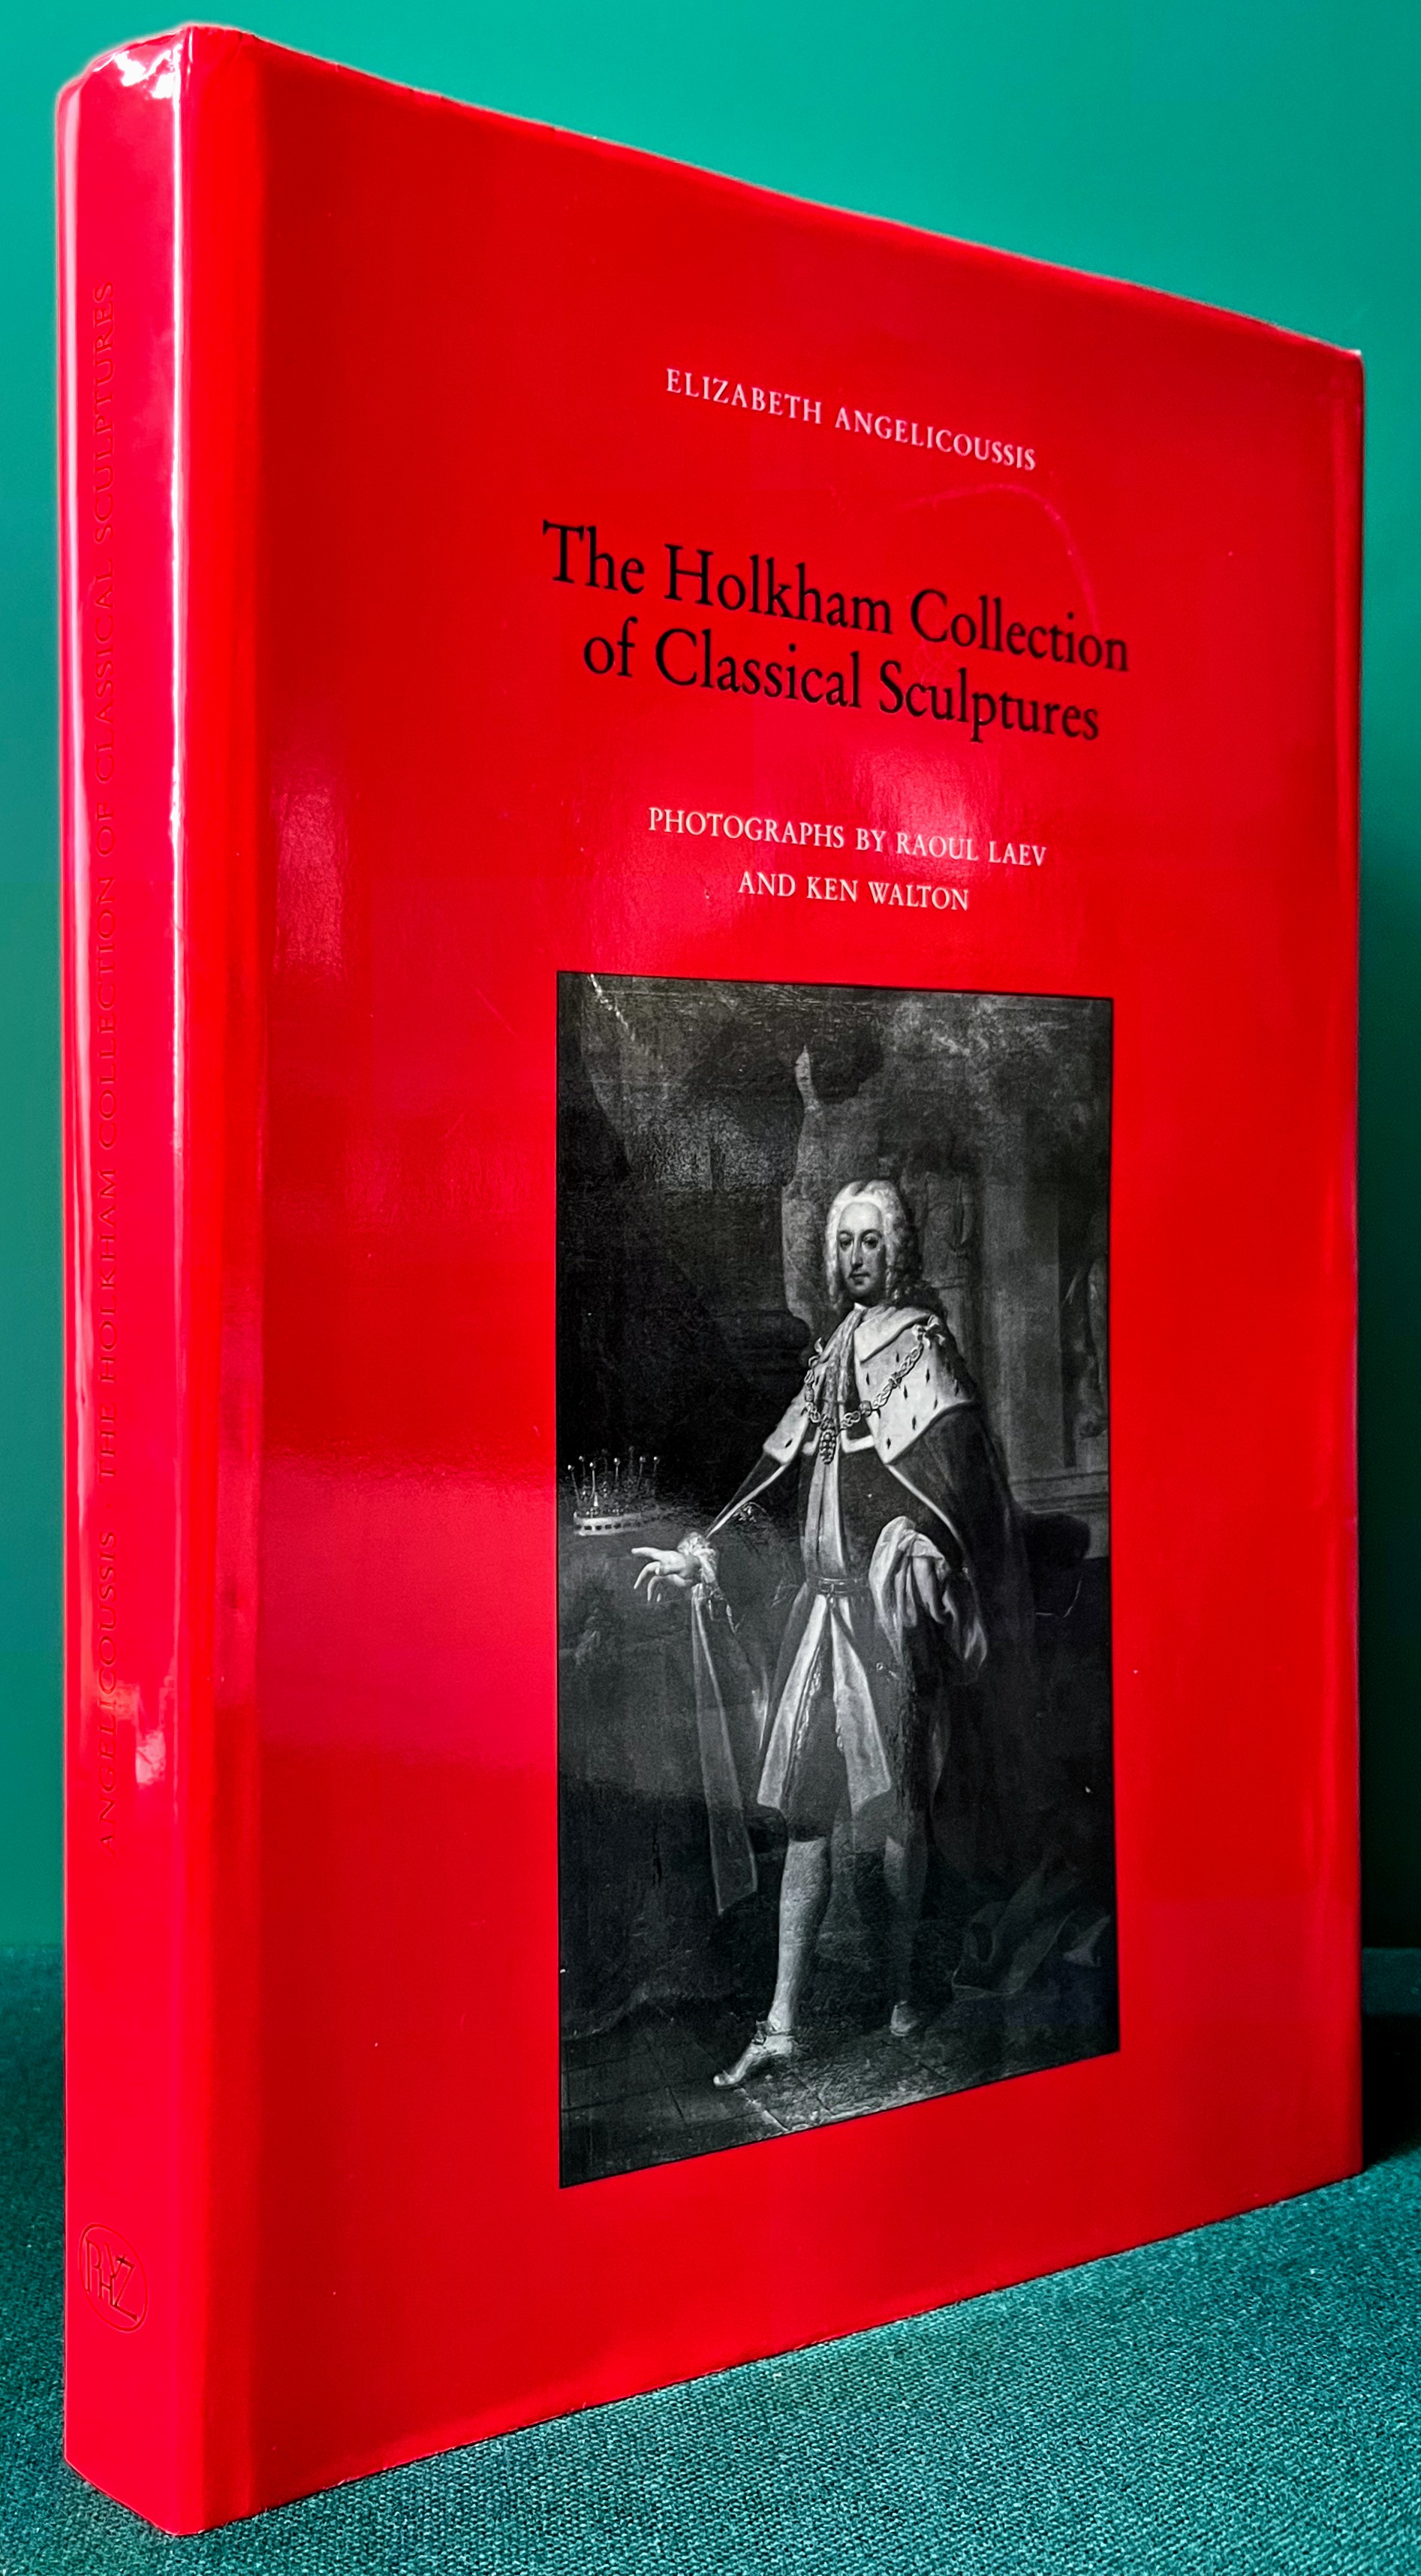 THE HOLKHAM COLLECTION OF CLASSICAL SCULPTURES (Signed, Presentation Copy) Monumenta Artis Romanae XXX - ANGELICOUSSIS, Elizabeth